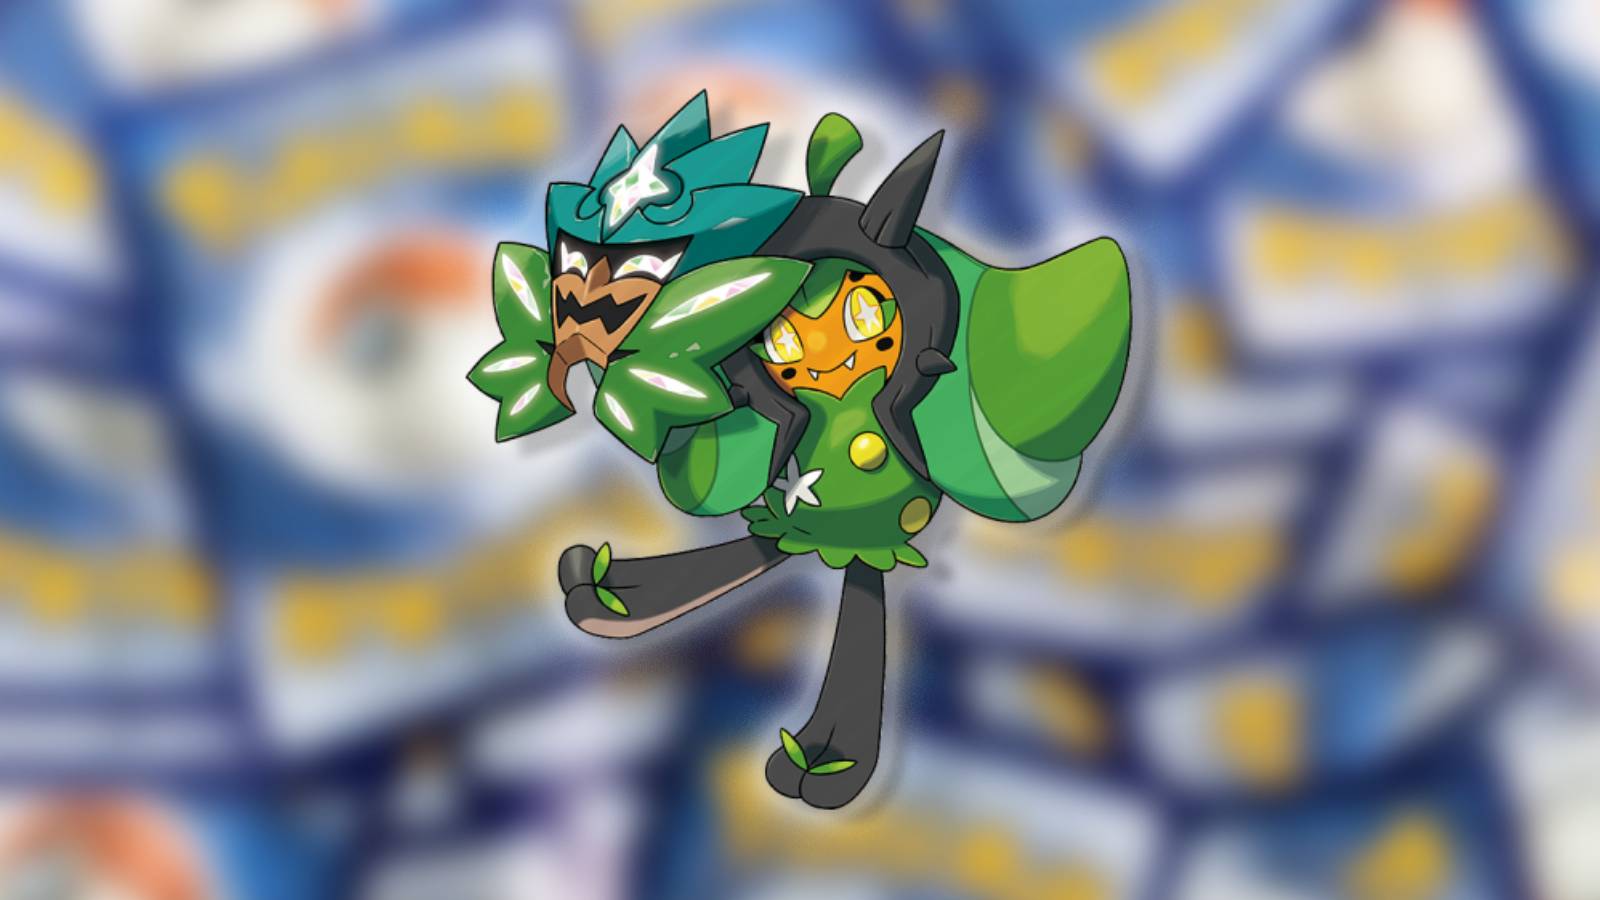 The Pokemon Ogerpon appears against a blurred background